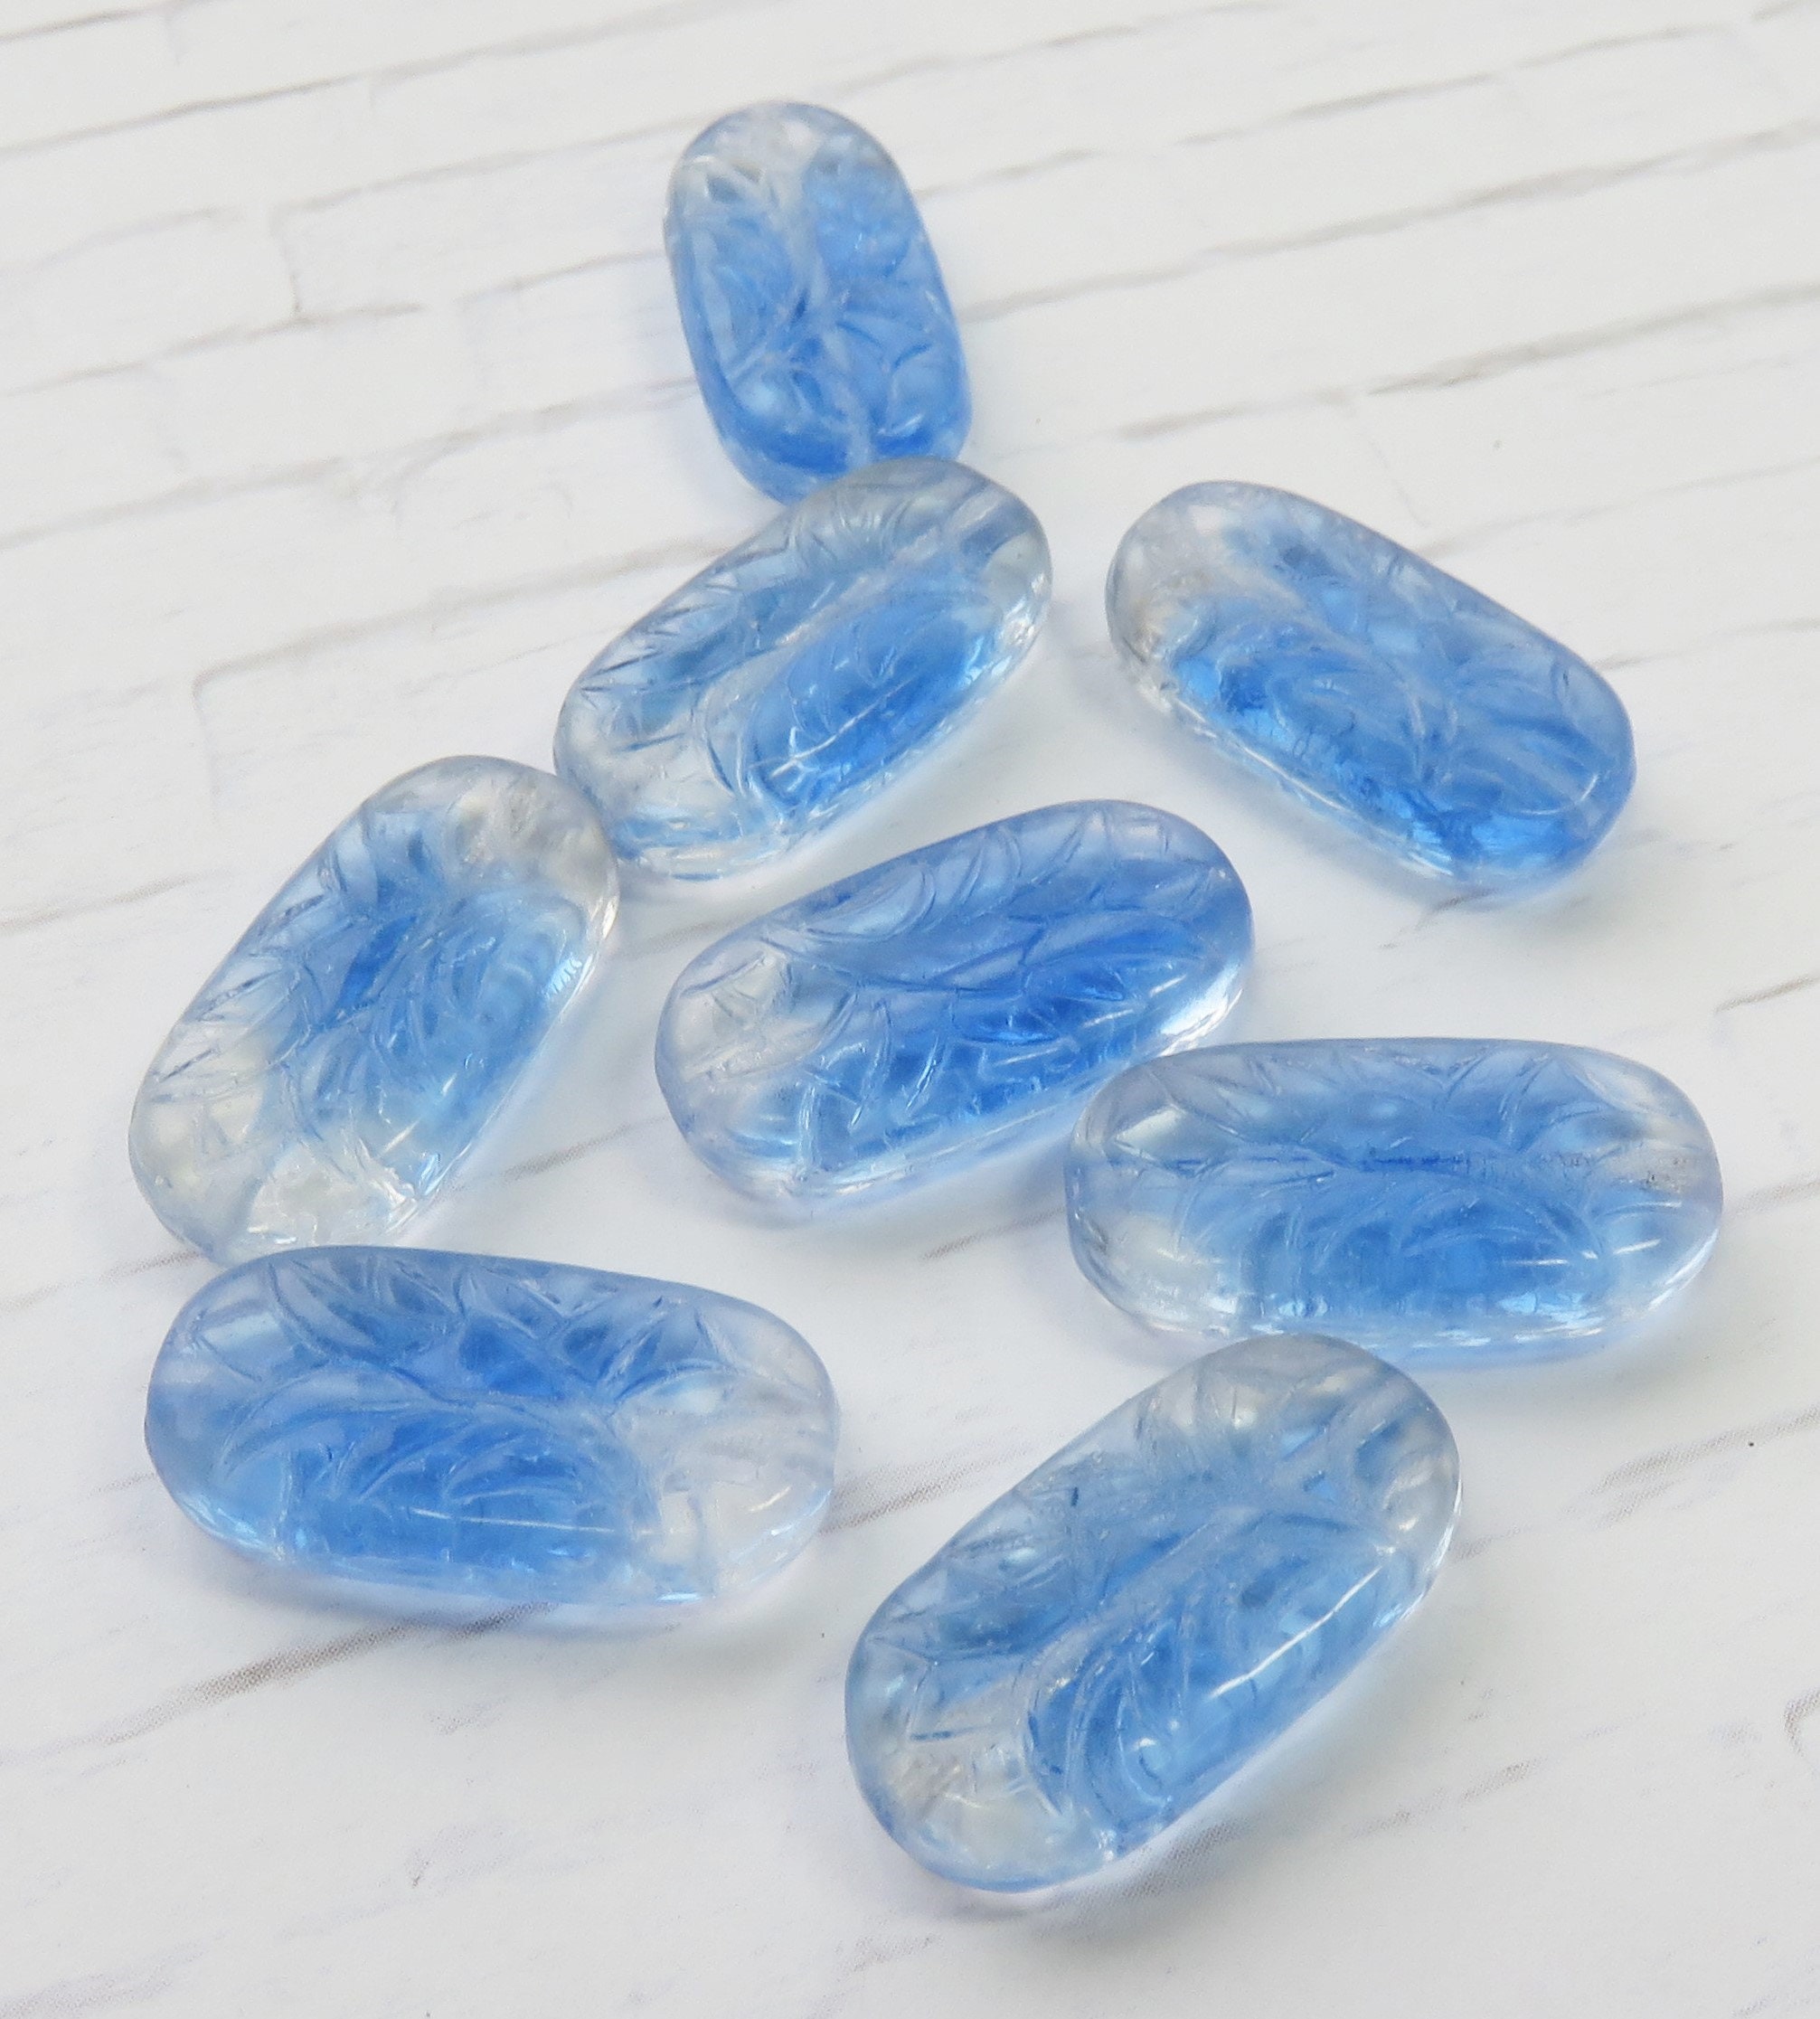 Crystal & Sapphire Blend, 4 Czech Glass 25 Mm X 12 Oval Beads With Etched Floral Design - Item 2051